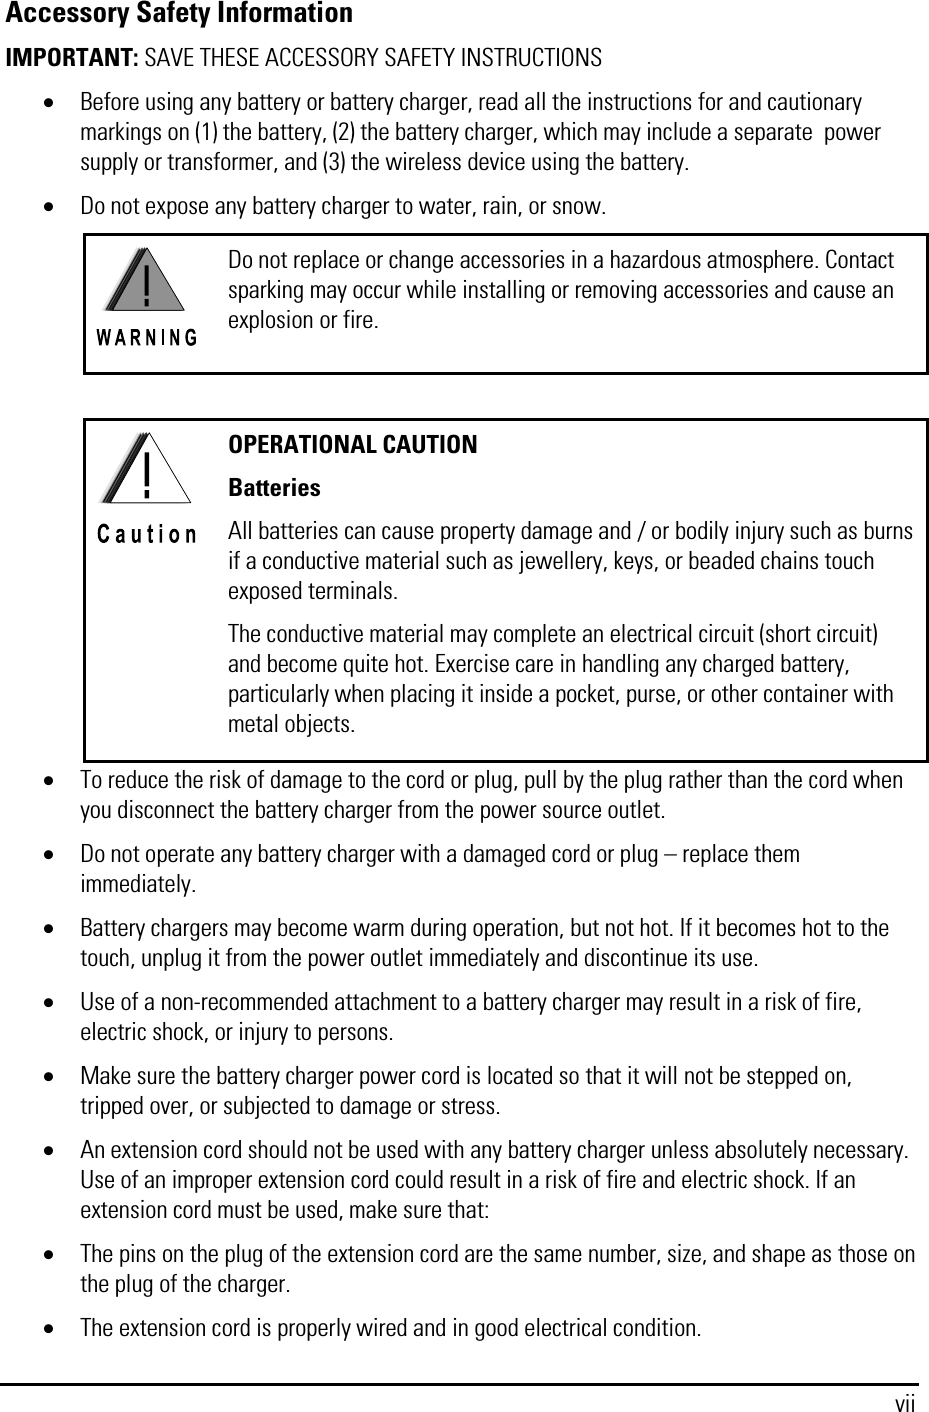  vii Accessory Safety Information  IMPORTANT: SAVE THESE ACCESSORY SAFETY INSTRUCTIONS • Before using any battery or battery charger, read all the instructions for and cautionary markings on (1) the battery, (2) the battery charger, which may include a separate  power supply or transformer, and (3) the wireless device using the battery. • Do not expose any battery charger to water, rain, or snow.  Do not replace or change accessories in a hazardous atmosphere. Contact sparking may occur while installing or removing accessories and cause an explosion or fire.   OPERATIONAL CAUTION Batteries All batteries can cause property damage and / or bodily injury such as burns if a conductive material such as jewellery, keys, or beaded chains touch exposed terminals. The conductive material may complete an electrical circuit (short circuit) and become quite hot. Exercise care in handling any charged battery, particularly when placing it inside a pocket, purse, or other container with metal objects. • To reduce the risk of damage to the cord or plug, pull by the plug rather than the cord when you disconnect the battery charger from the power source outlet. • Do not operate any battery charger with a damaged cord or plug – replace them immediately. • Battery chargers may become warm during operation, but not hot. If it becomes hot to the touch, unplug it from the power outlet immediately and discontinue its use. • Use of a non-recommended attachment to a battery charger may result in a risk of fire, electric shock, or injury to persons. • Make sure the battery charger power cord is located so that it will not be stepped on, tripped over, or subjected to damage or stress. • An extension cord should not be used with any battery charger unless absolutely necessary. Use of an improper extension cord could result in a risk of fire and electric shock. If an extension cord must be used, make sure that: • The pins on the plug of the extension cord are the same number, size, and shape as those on the plug of the charger. • The extension cord is properly wired and in good electrical condition. 